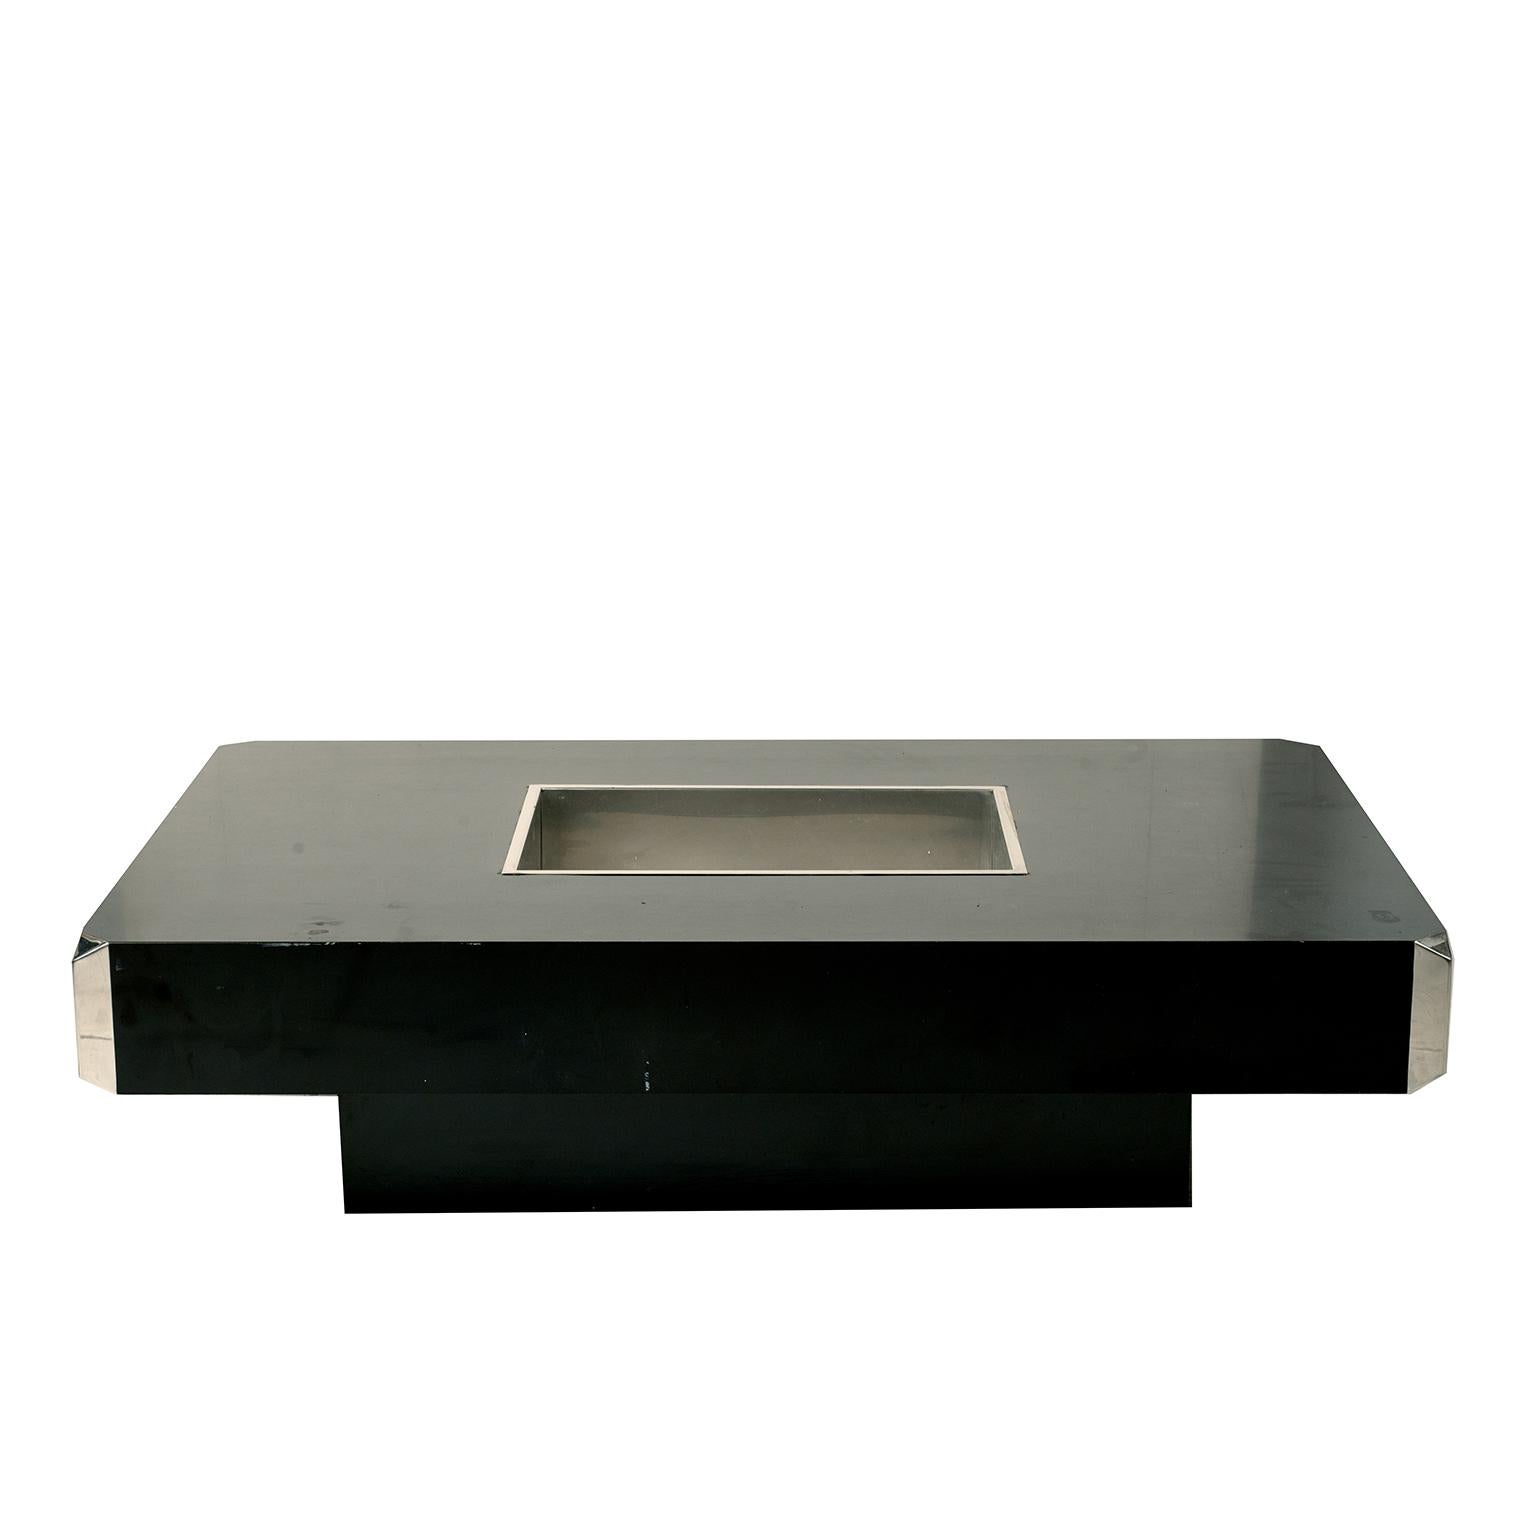 This is a design classic from the 1970’s by Willy Rizzo. A chic low coffee table in black Formica with a stainless steel insert for serving chilled wines! The corners are stainless steel. It is in good vintage condition.
It is priced “as is”